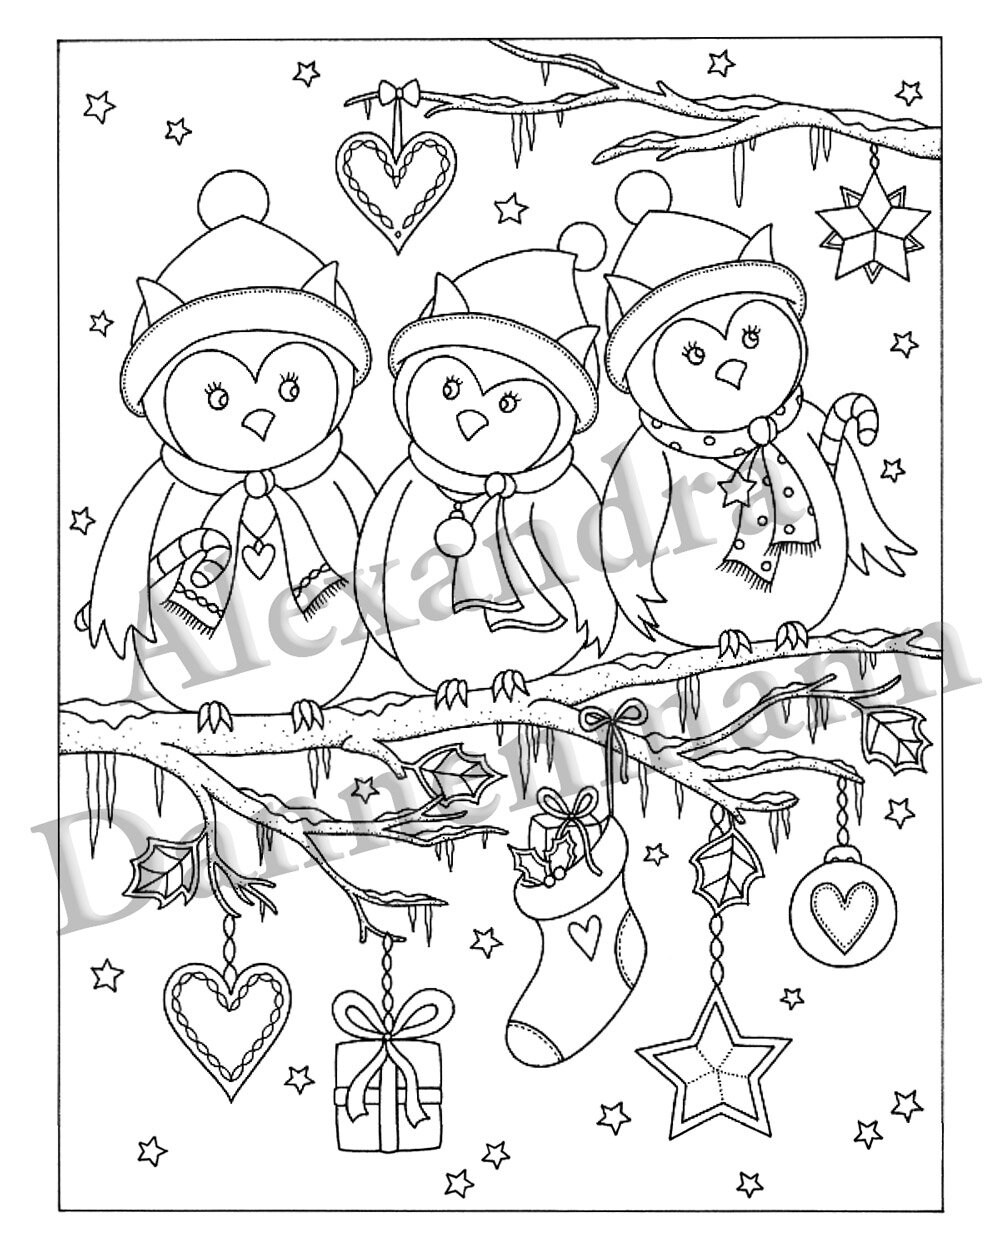 Christmas Coloring Pages for Kids Ages 8-12 Volume 1: Cute Christmas  Characters for Kids by Dunstamac, Paperback